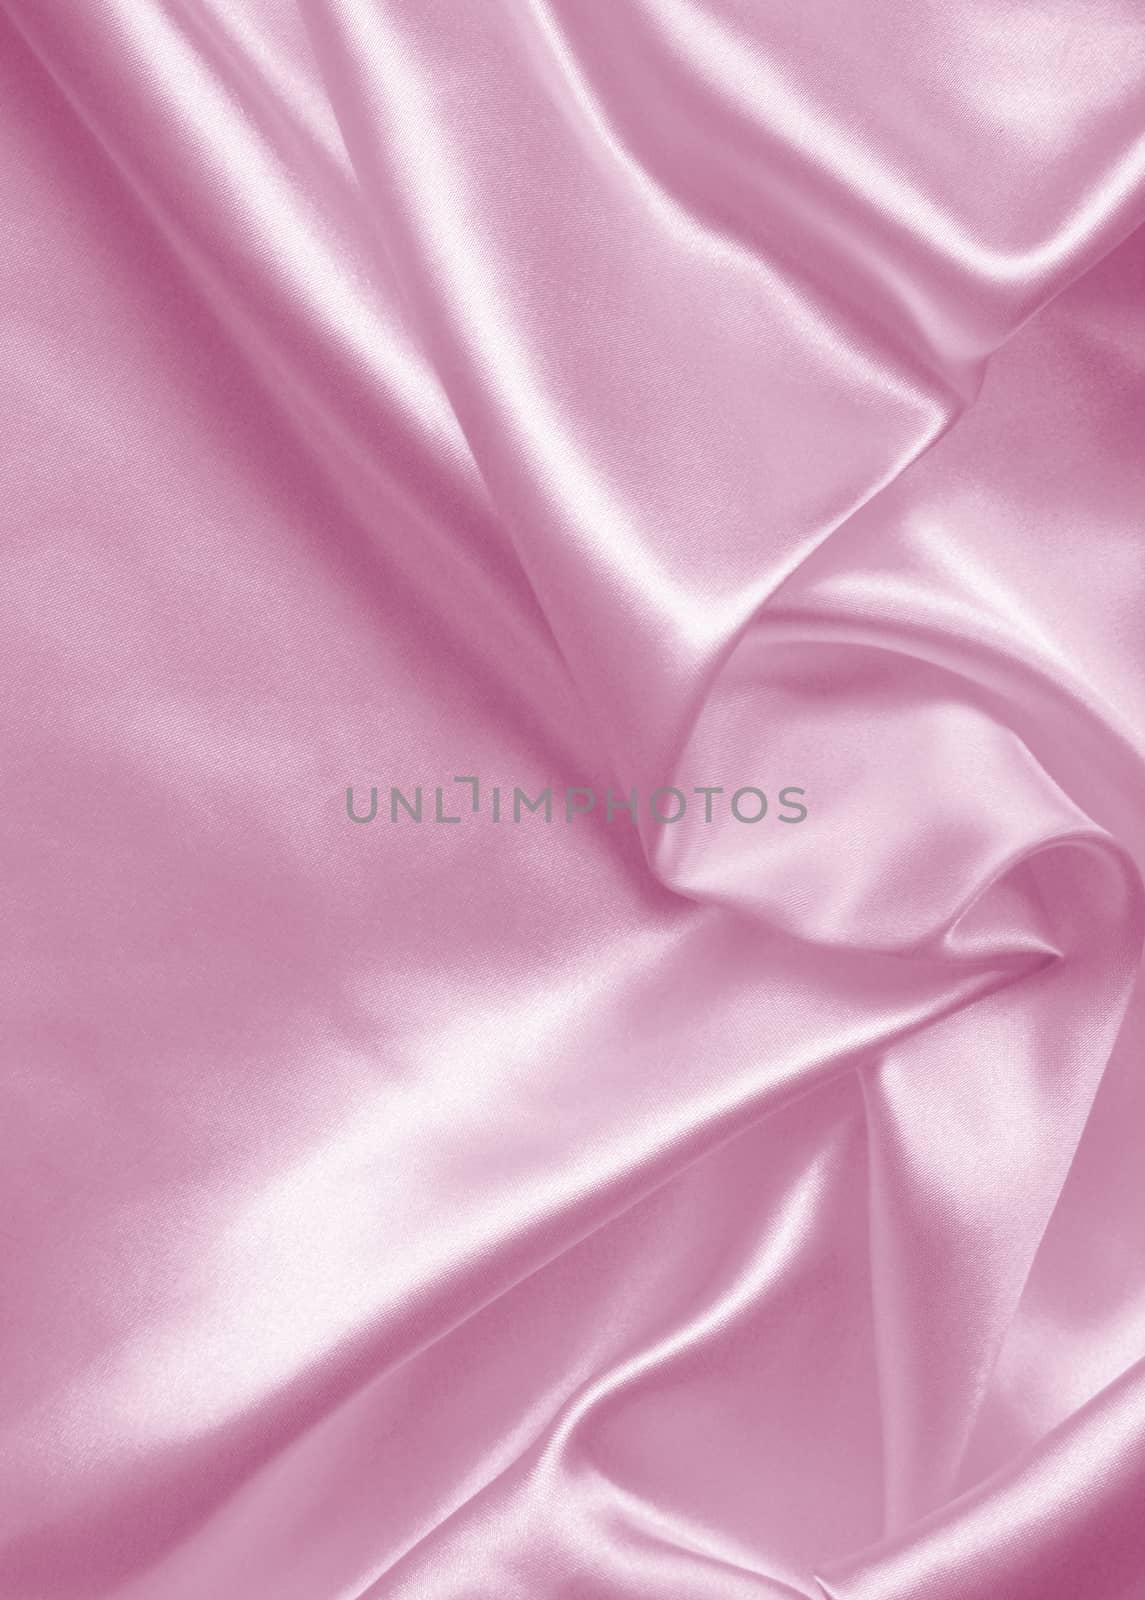 Smooth elegant pink silk or satin can use as wedding background